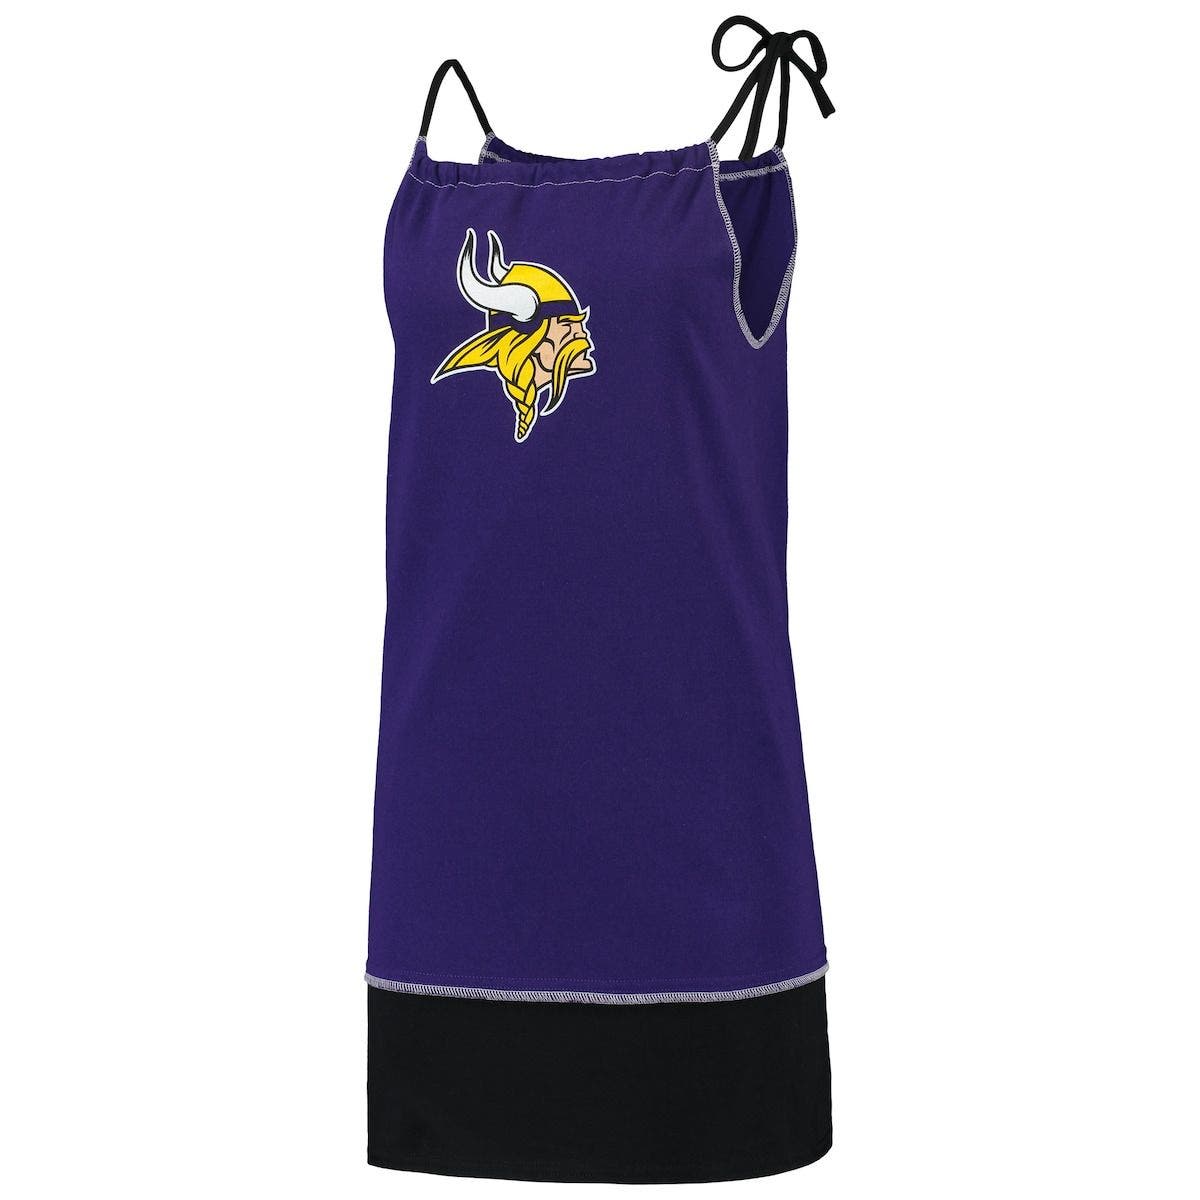 Womens Royal New England Patriots Sustainable Vintage Tank Dress at Nordstrom Nordstrom Women Clothing Dresses Vintage Dresses 